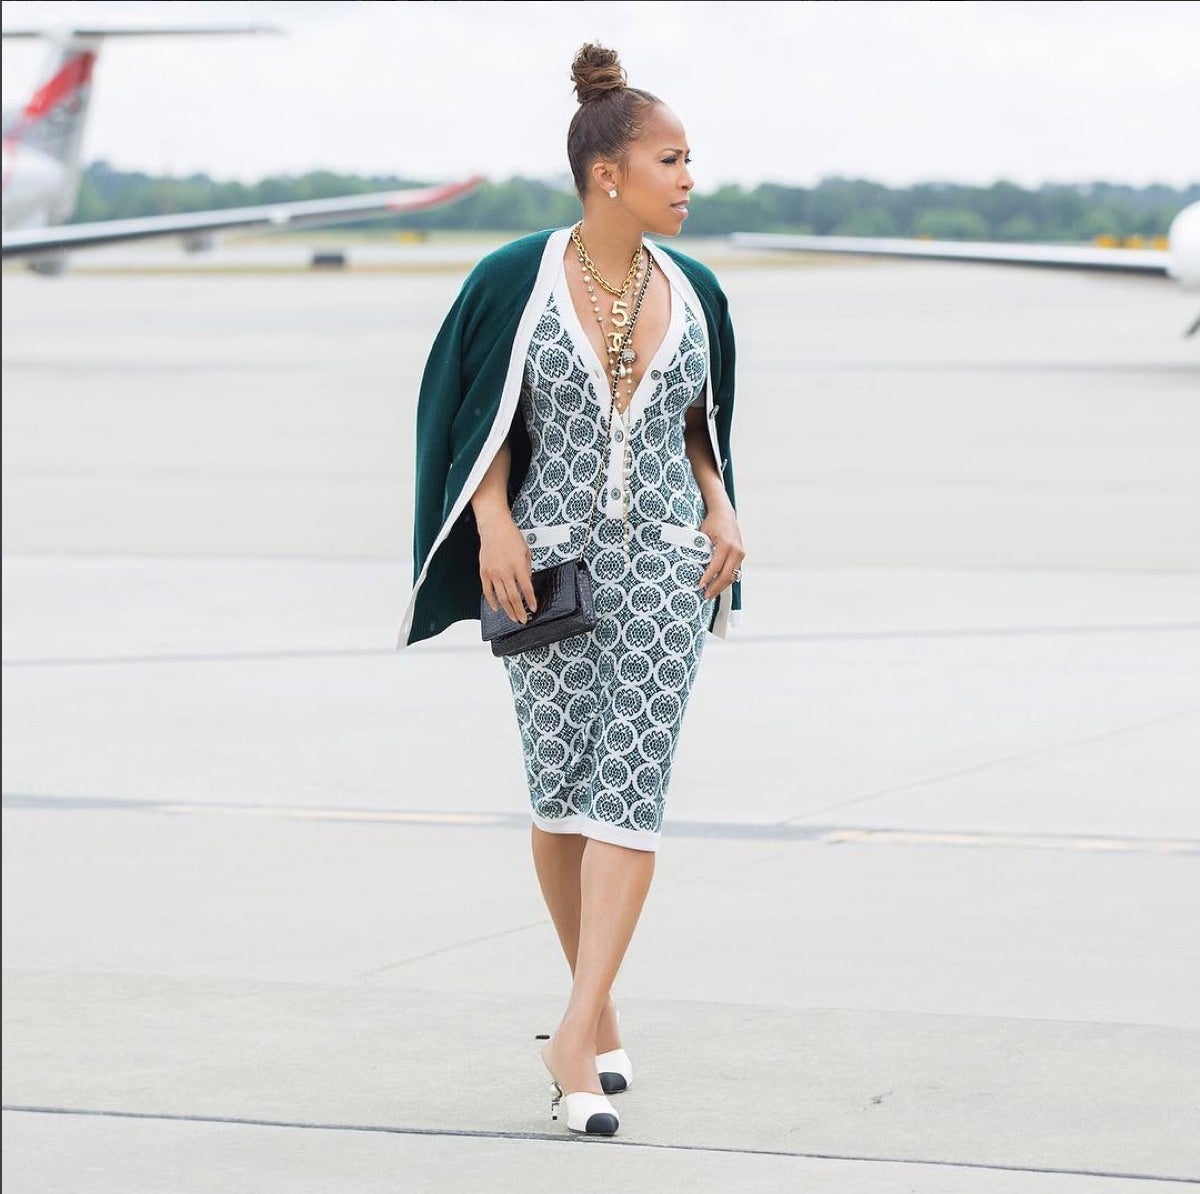 39 Times Marjorie Harvey's Instagram Outdid Your Favorite Fashion